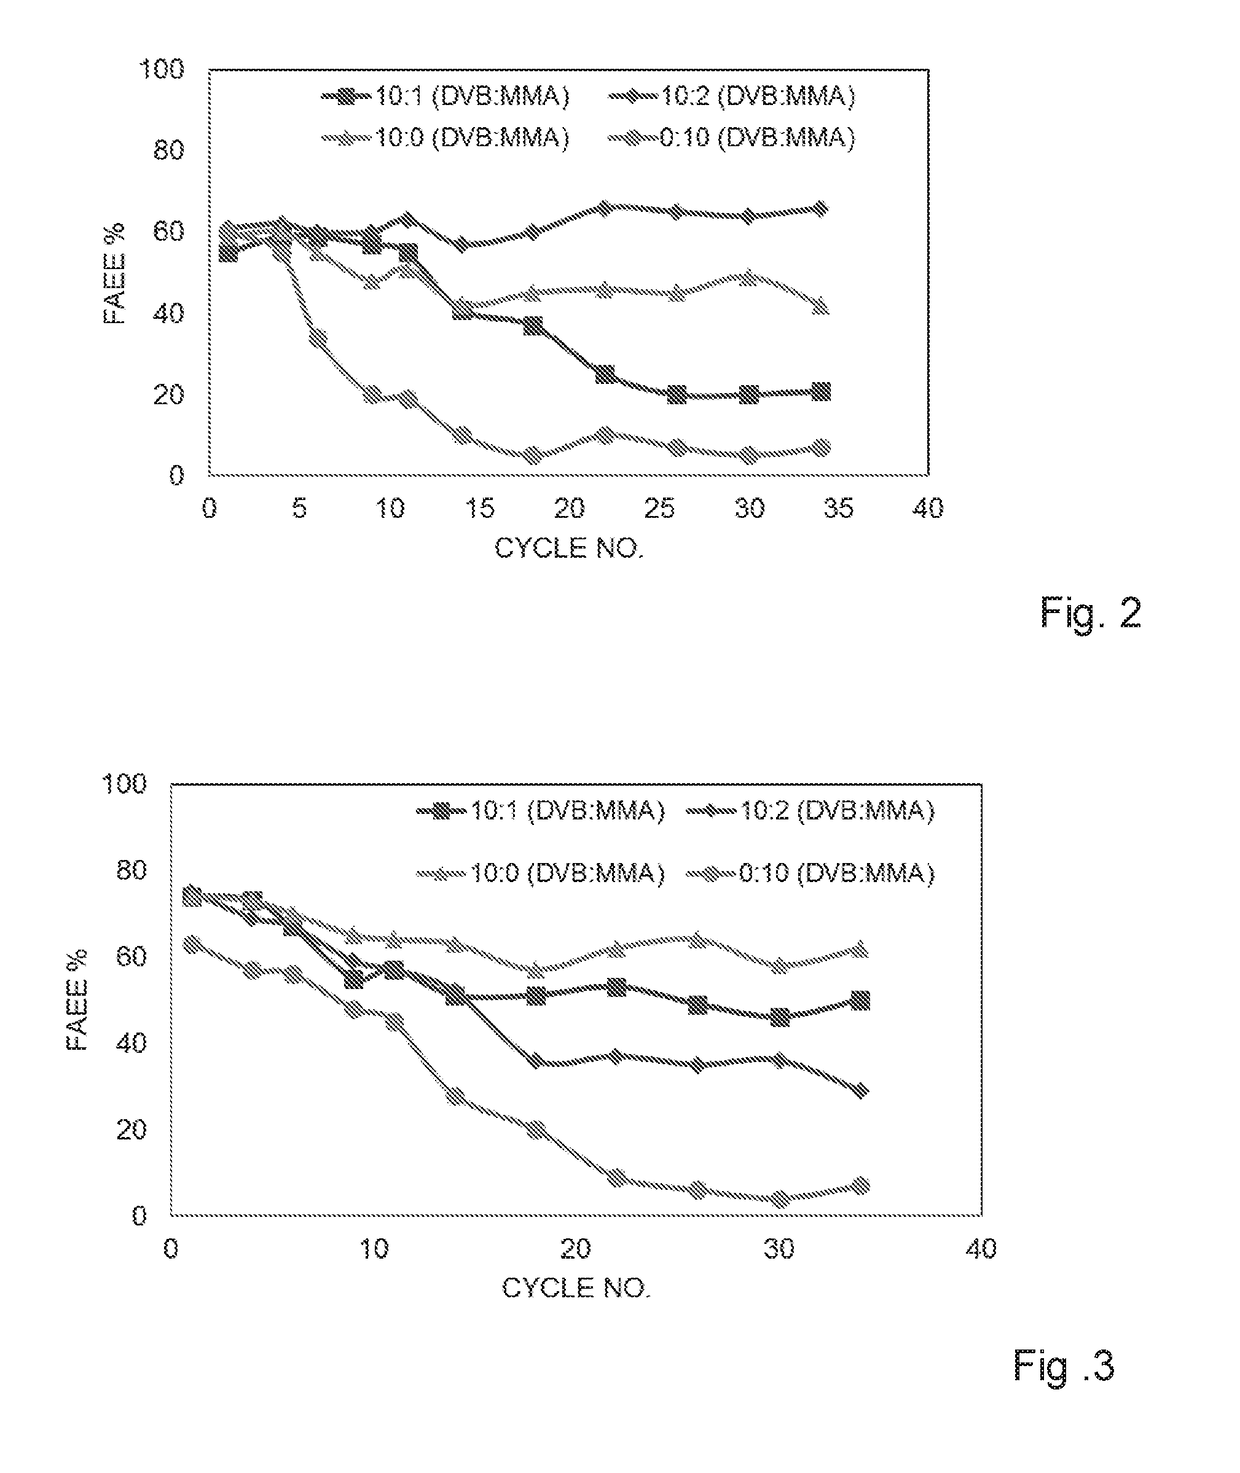 ENZYMATIC ENRICHMENT OF n-3 FATTY ACIDS IN THE FORM OF GLYCERIDES